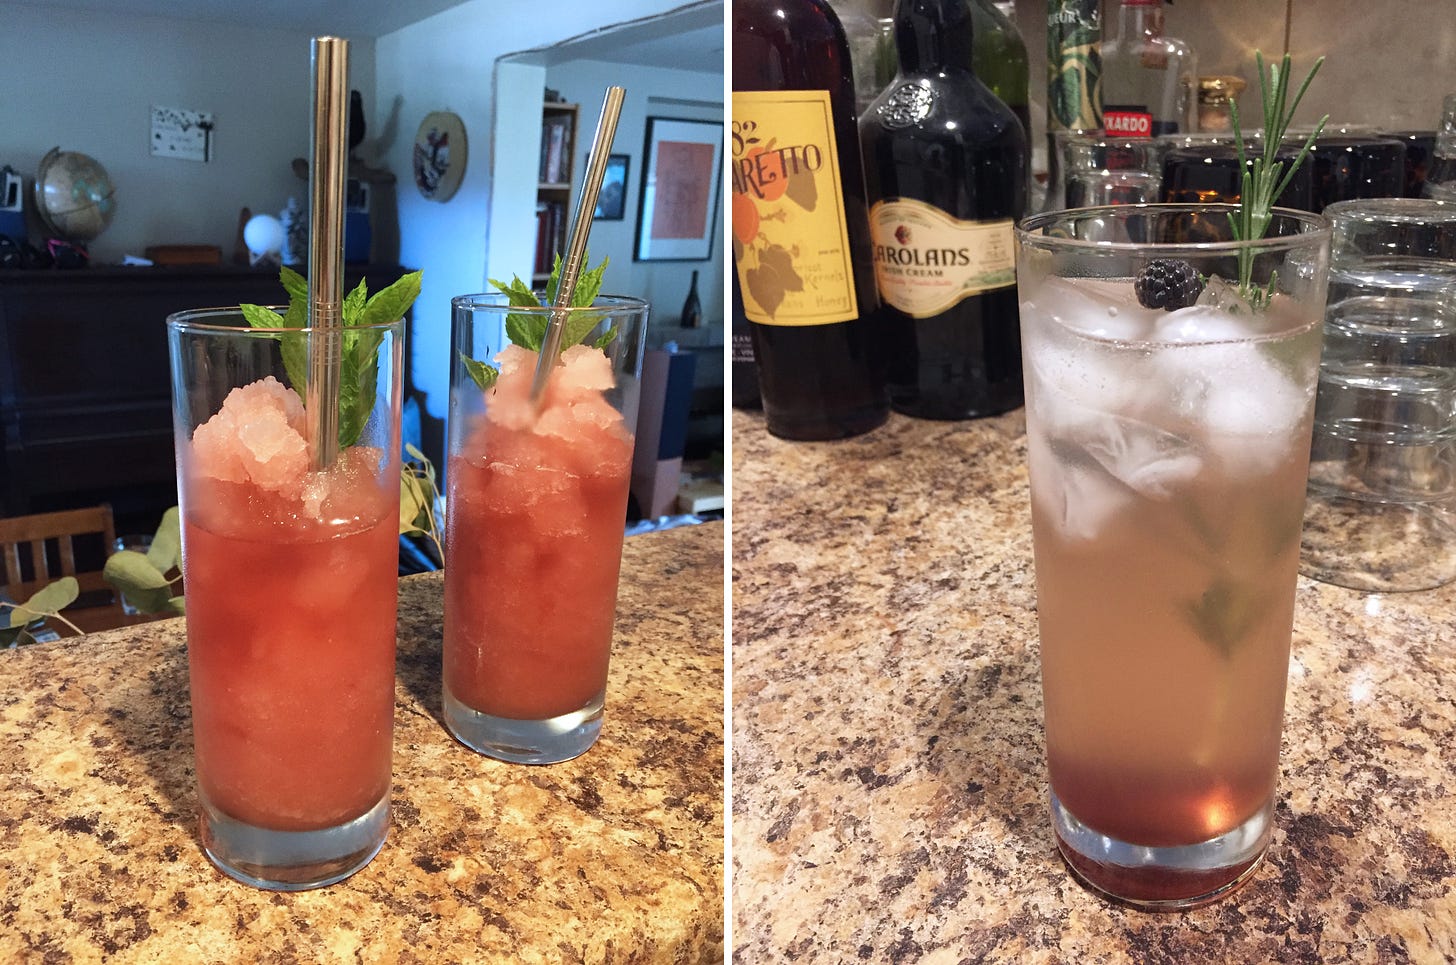 left image: two collins glasses with metal straws, filled with pink frosé and large sprigs of mint. right image: a collins glass with a light pink transluscent cocktail, darker at the bottom. a sprig of rosemary and two black raspberries sit on top of the ice cubes.